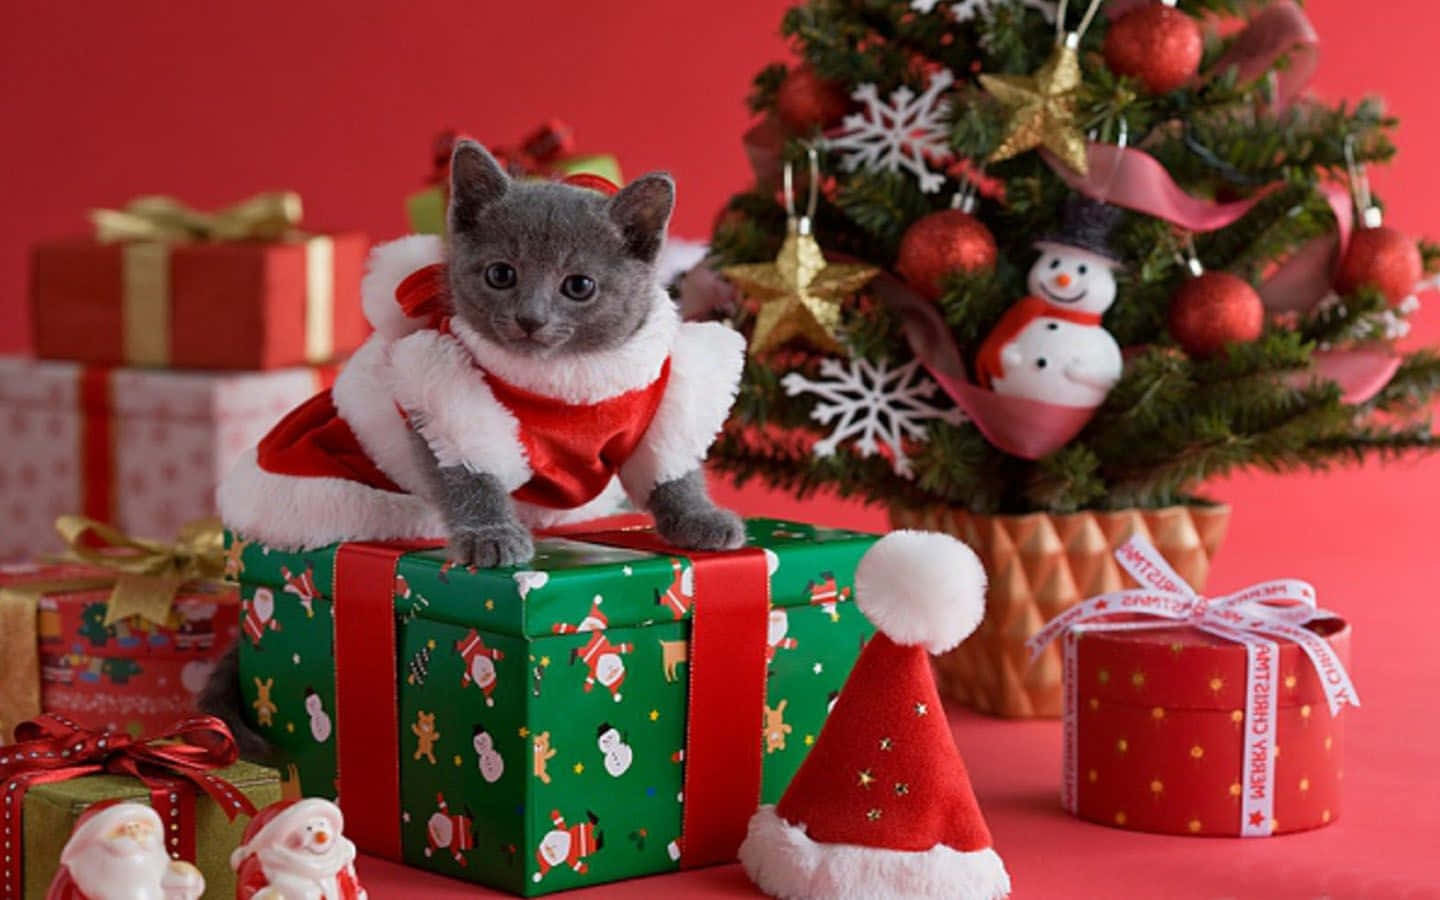 Christmas is Coming and this Cat is Ready